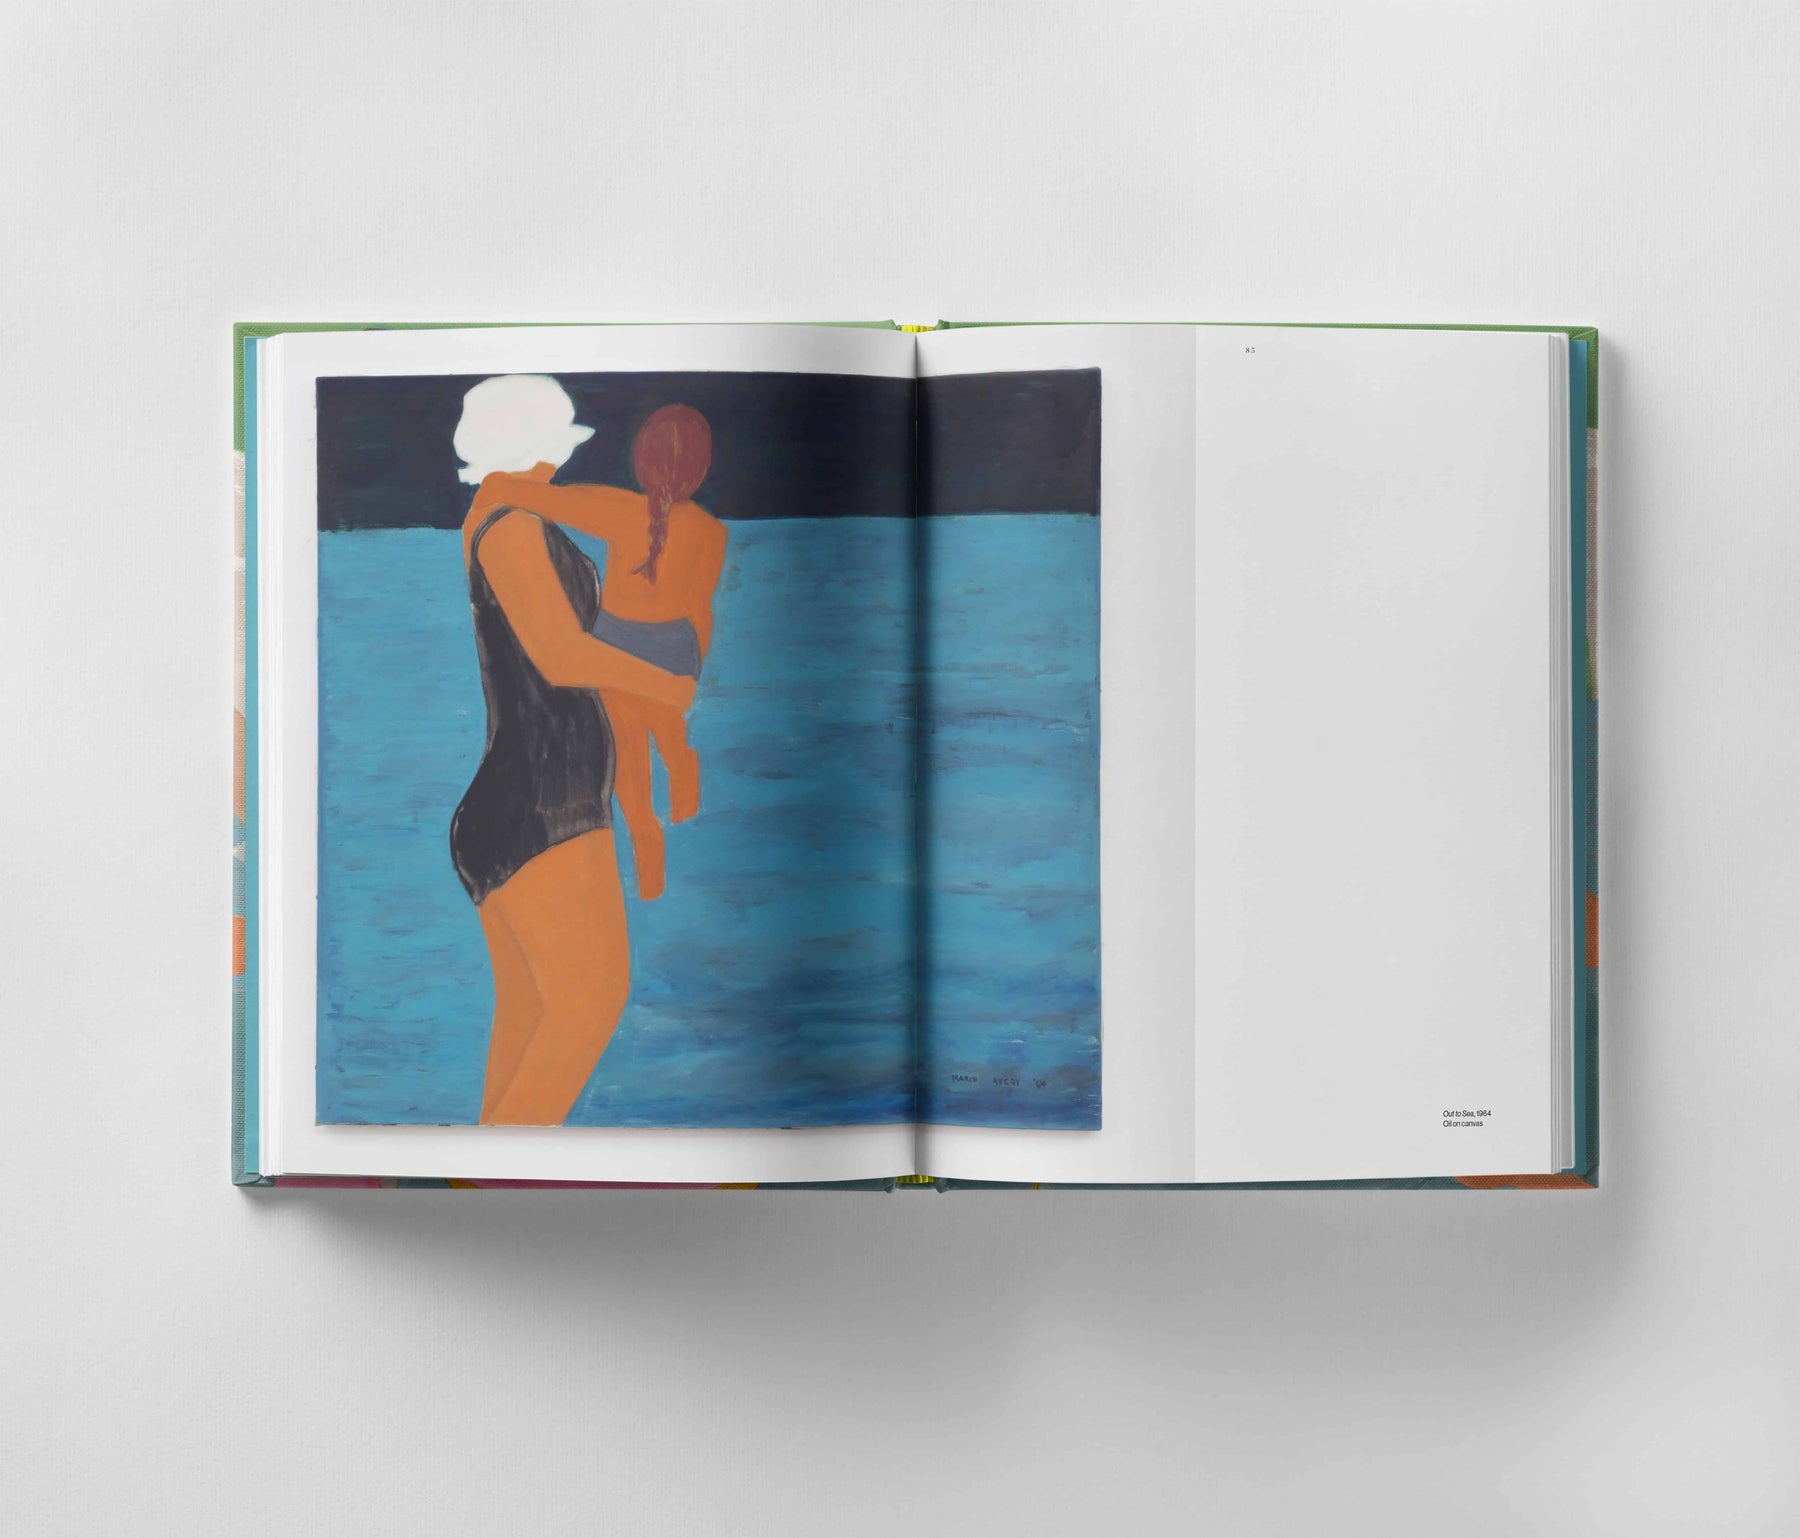 An open book reveals an emotional painting of a person in a swimsuit holding a child by the water against a dark sky, capturing the emotional depth reminiscent of *March Avery: A Life in Color* by Black Dog Online.